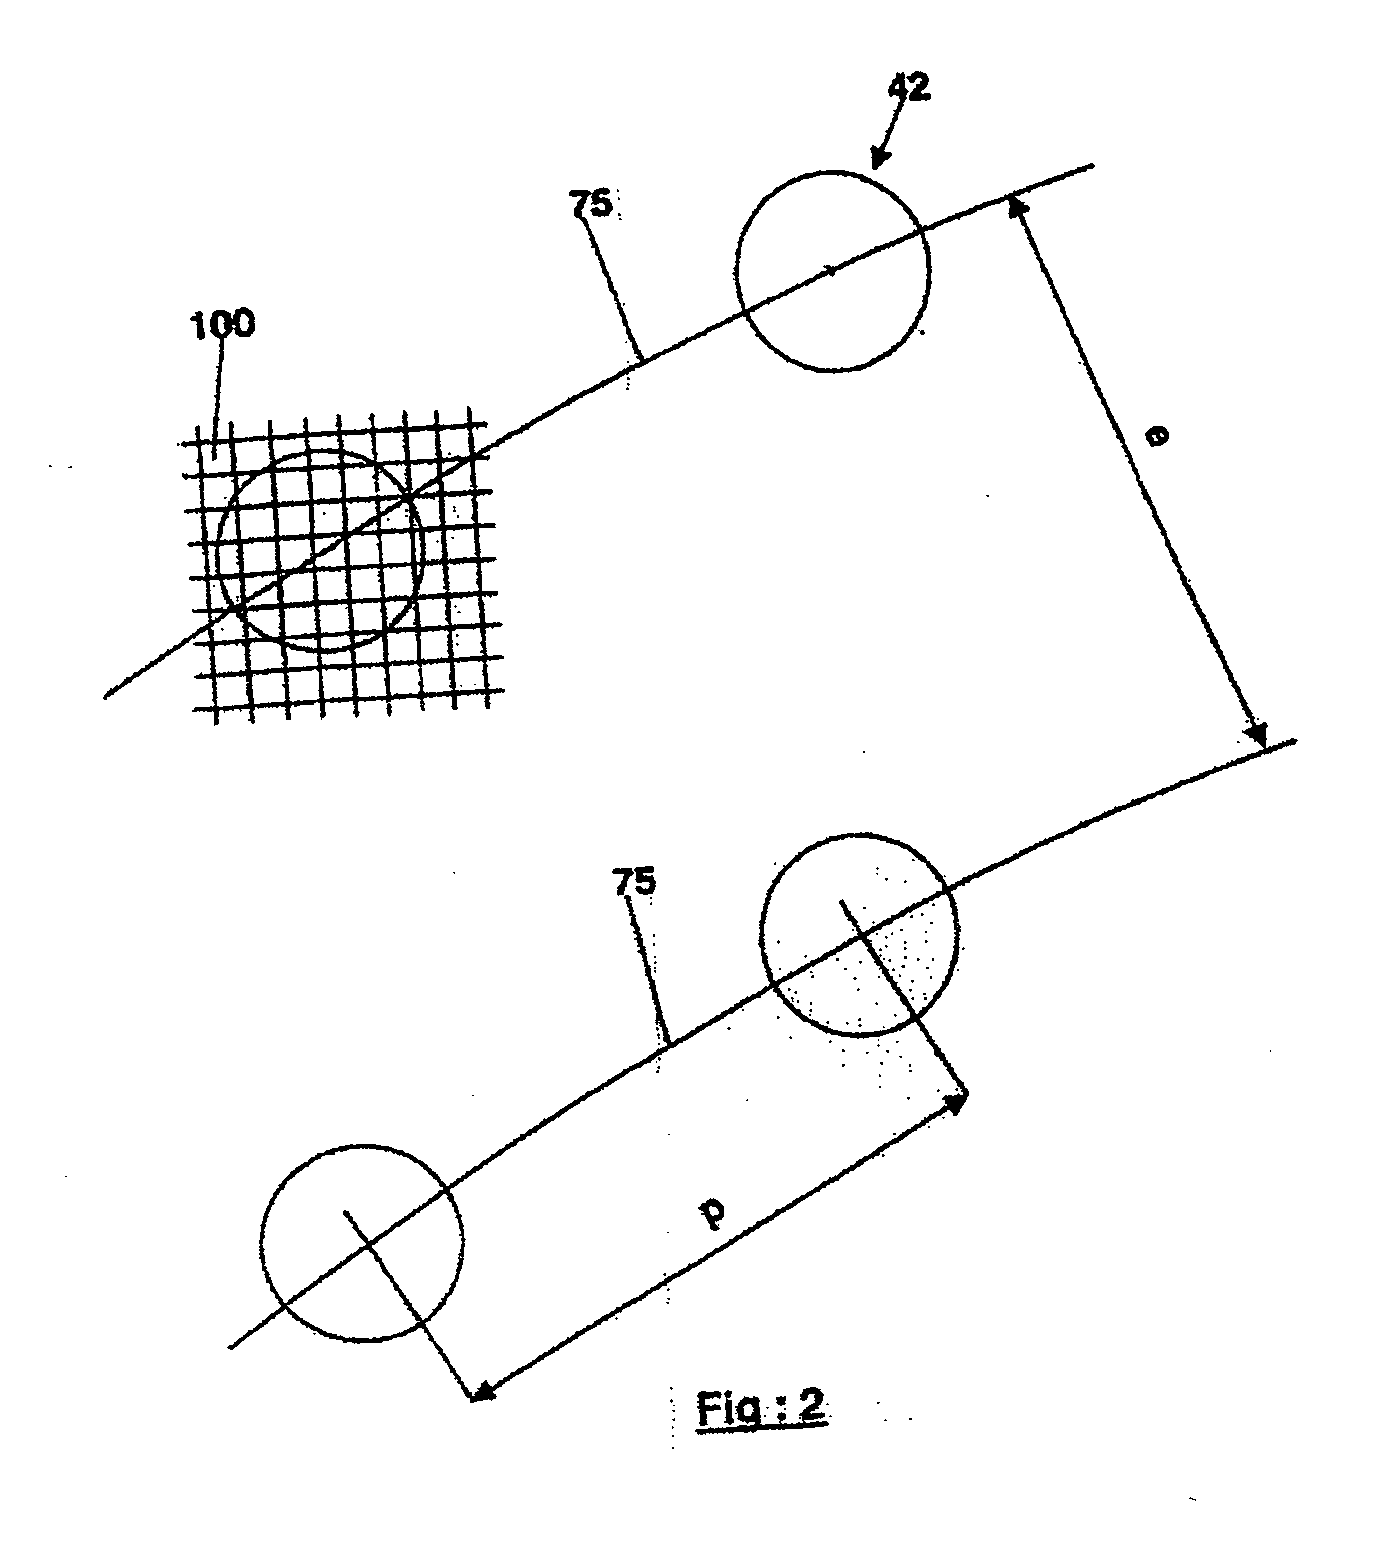 Method of assembling and checking a double-resonator acoustic panel with a honeycomb core